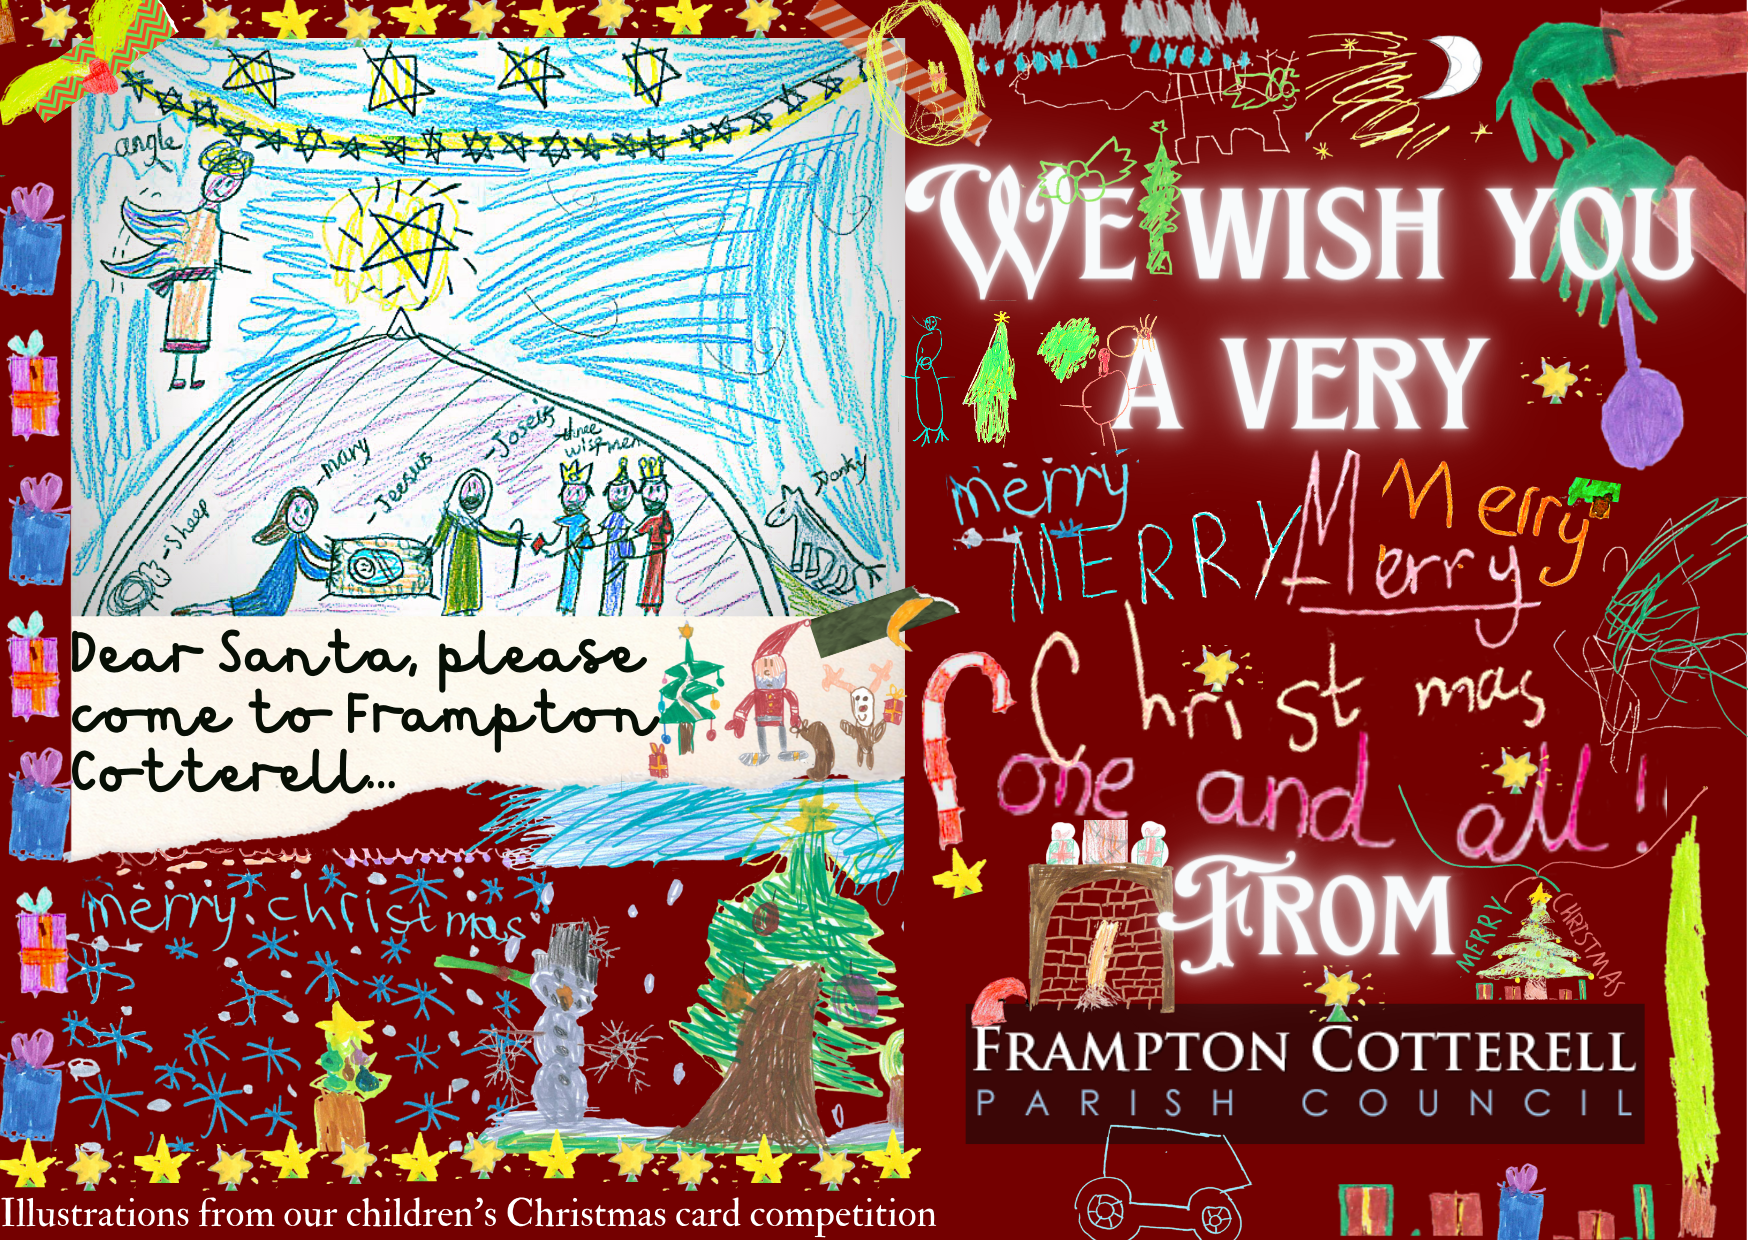 A Christmas e-card covered in children's illustrations on a (generally) Christmassy theme: Christmas trees, stars, gifts, snowmen, chimneys, a car, a wreath, the Grinch's hands holding baubles etc. In the upper left is a complete page of a child's drawing of The Nativity, including the labels, "angle, sheep, Mary, Josief, Jeesus, Three Wise Men, and Donky" [sic]. The main text reads, "We Wish You A Very Merry, Merry, Merry, Merry Christmas One And All, From Frampton Cotterell Parish Council". The words "Merry, merry, merry, merry Christmas, one and all" are all in different children's handwriting.